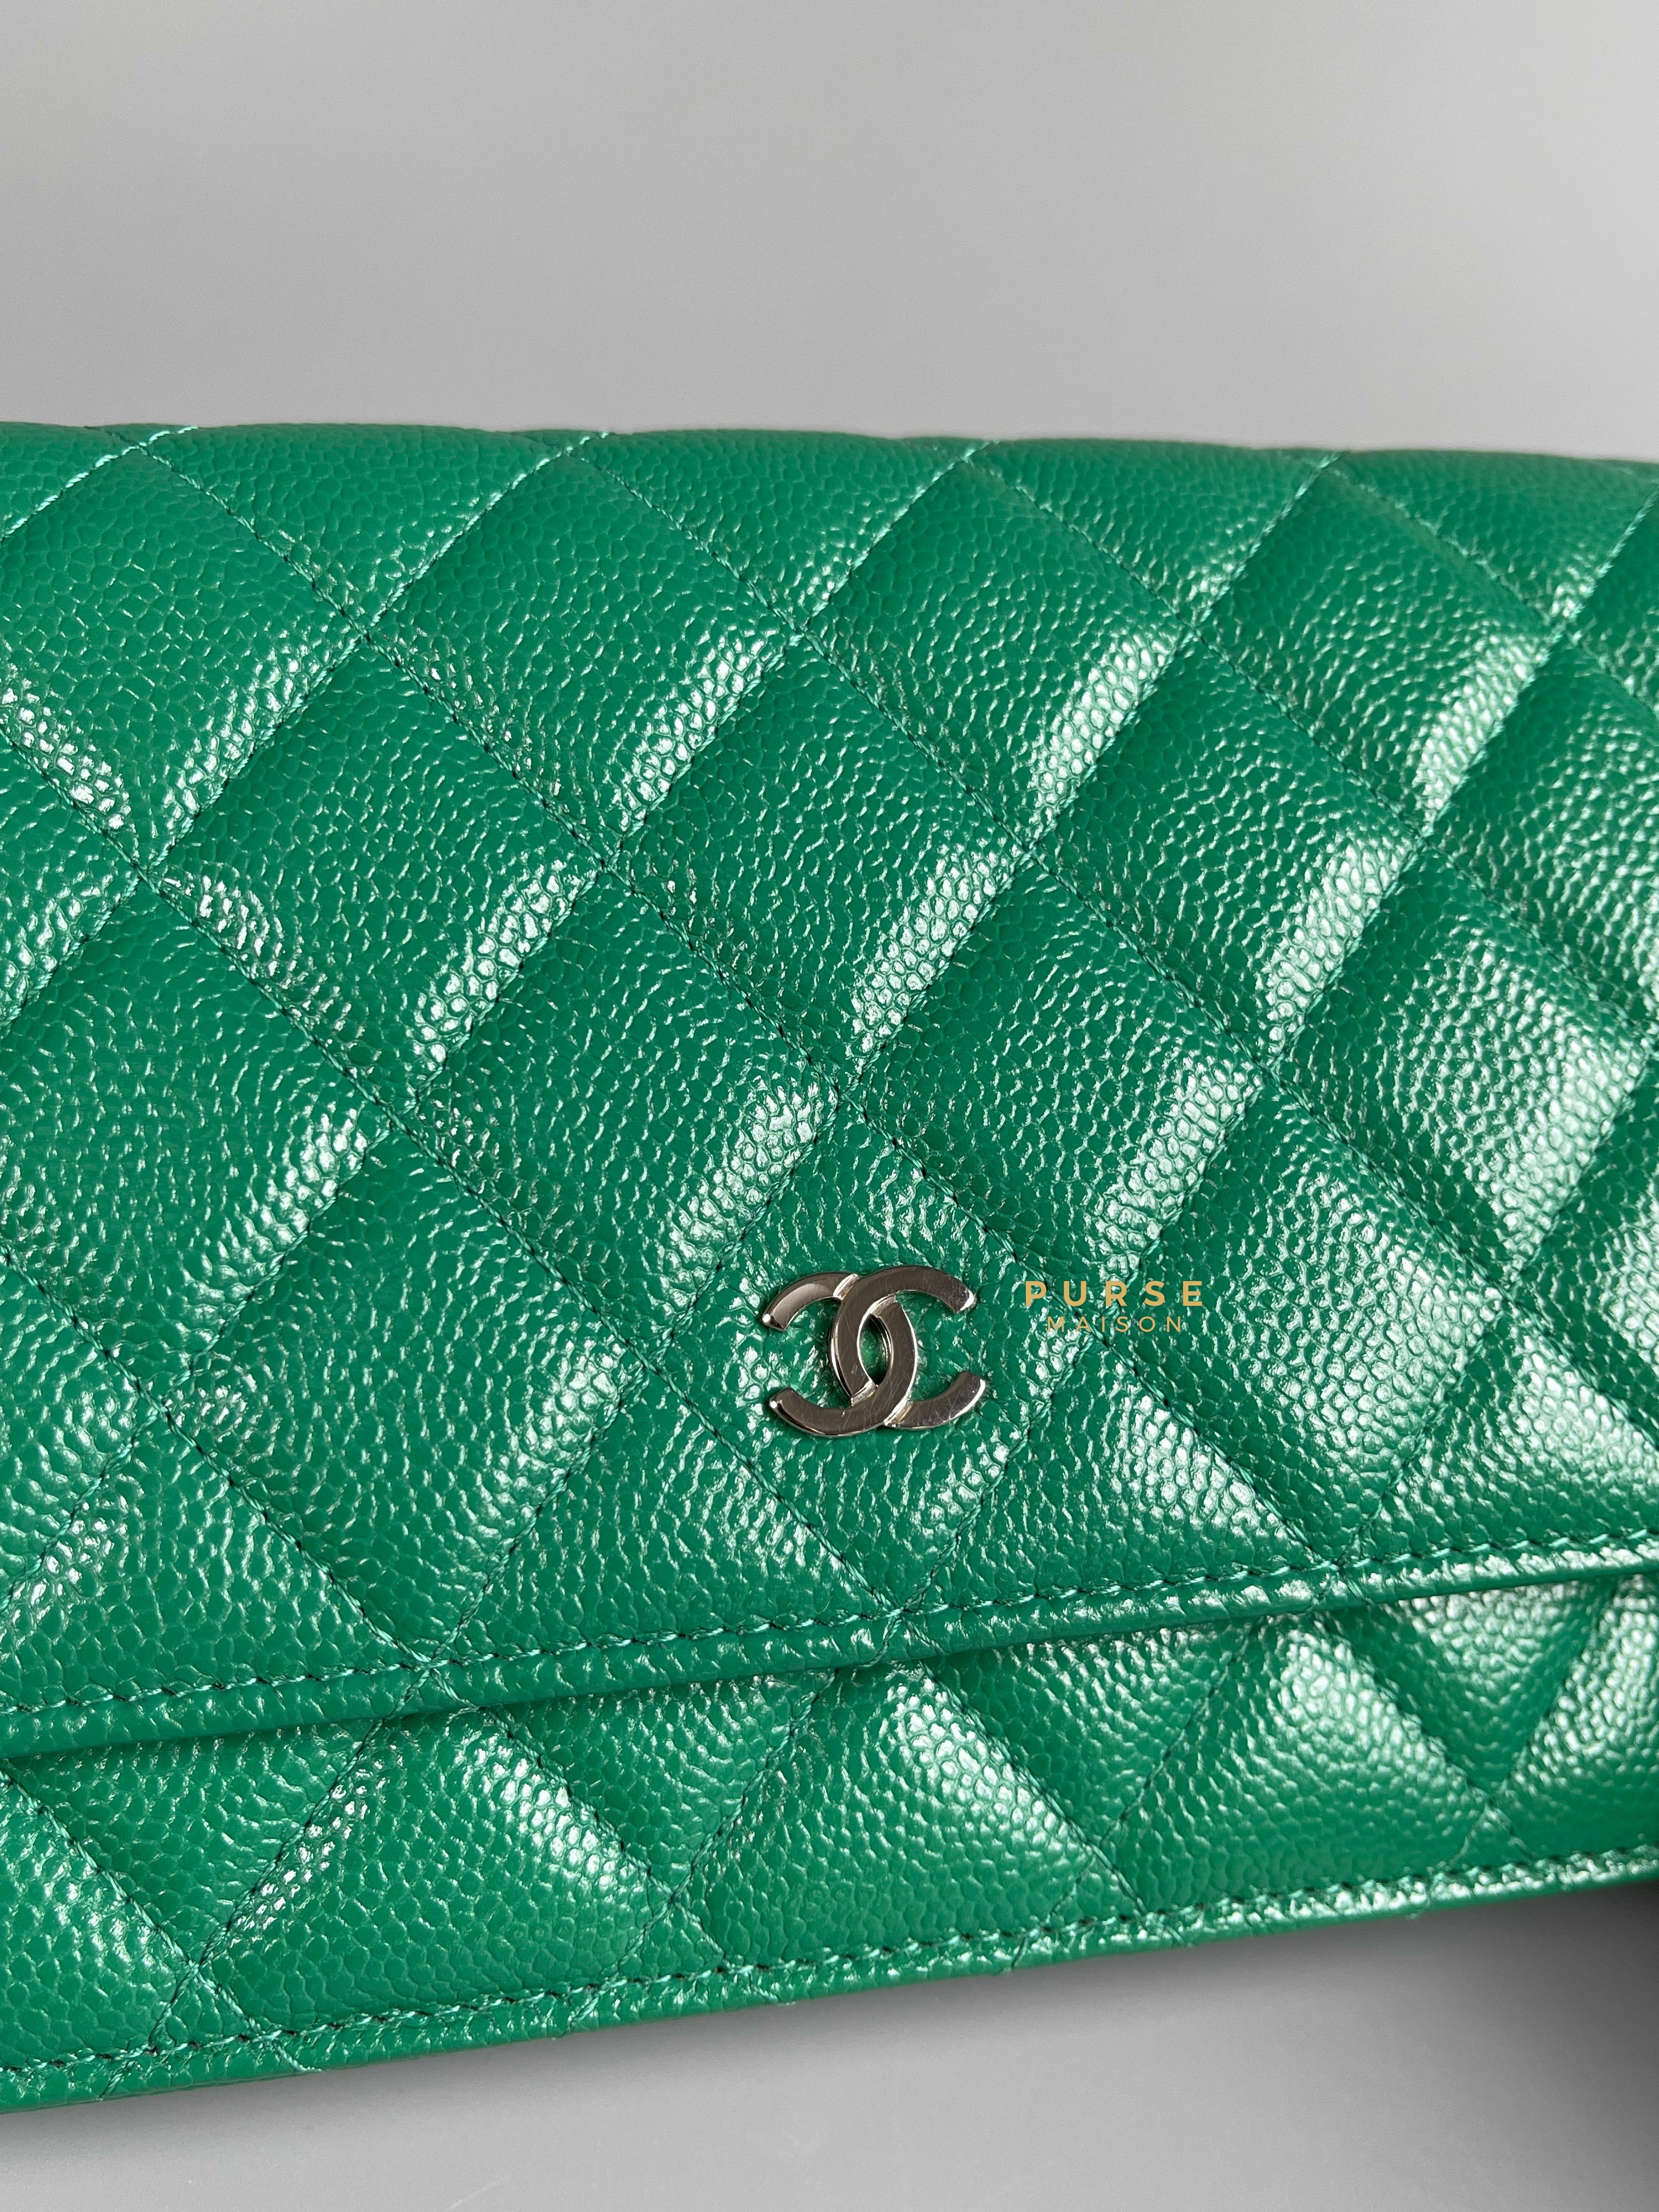 Chanel Classic Wallet on Chain 20B Green Caviar and Silver Hardware Series 30 | Purse Maison Luxury Bags Shop